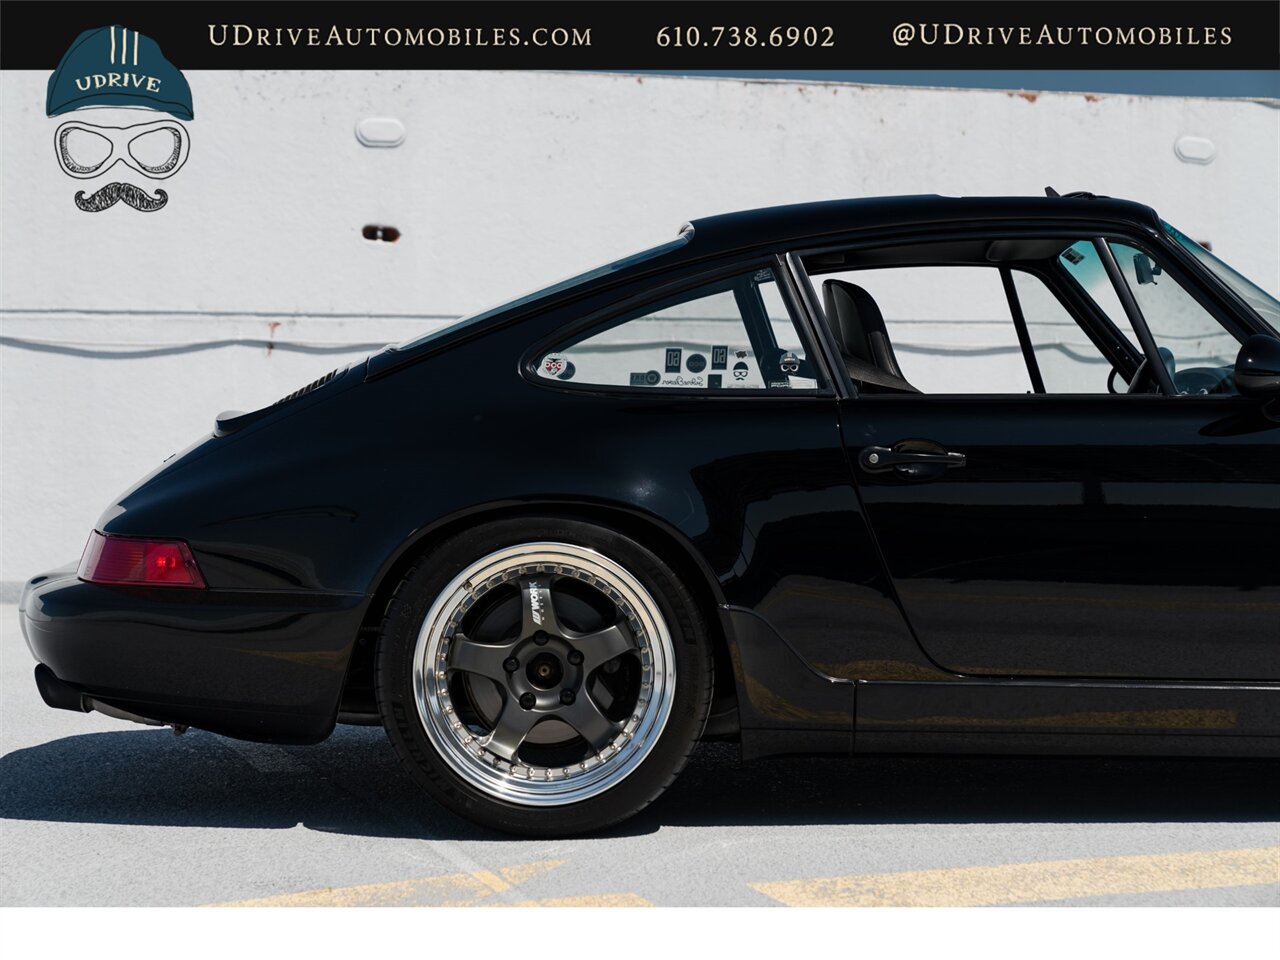 1990 Porsche 911 Carrera 2  911 964 C2 5 Speed Over $53k in Recent Service and Upgrades Spectacular - Photo 15 - West Chester, PA 19382